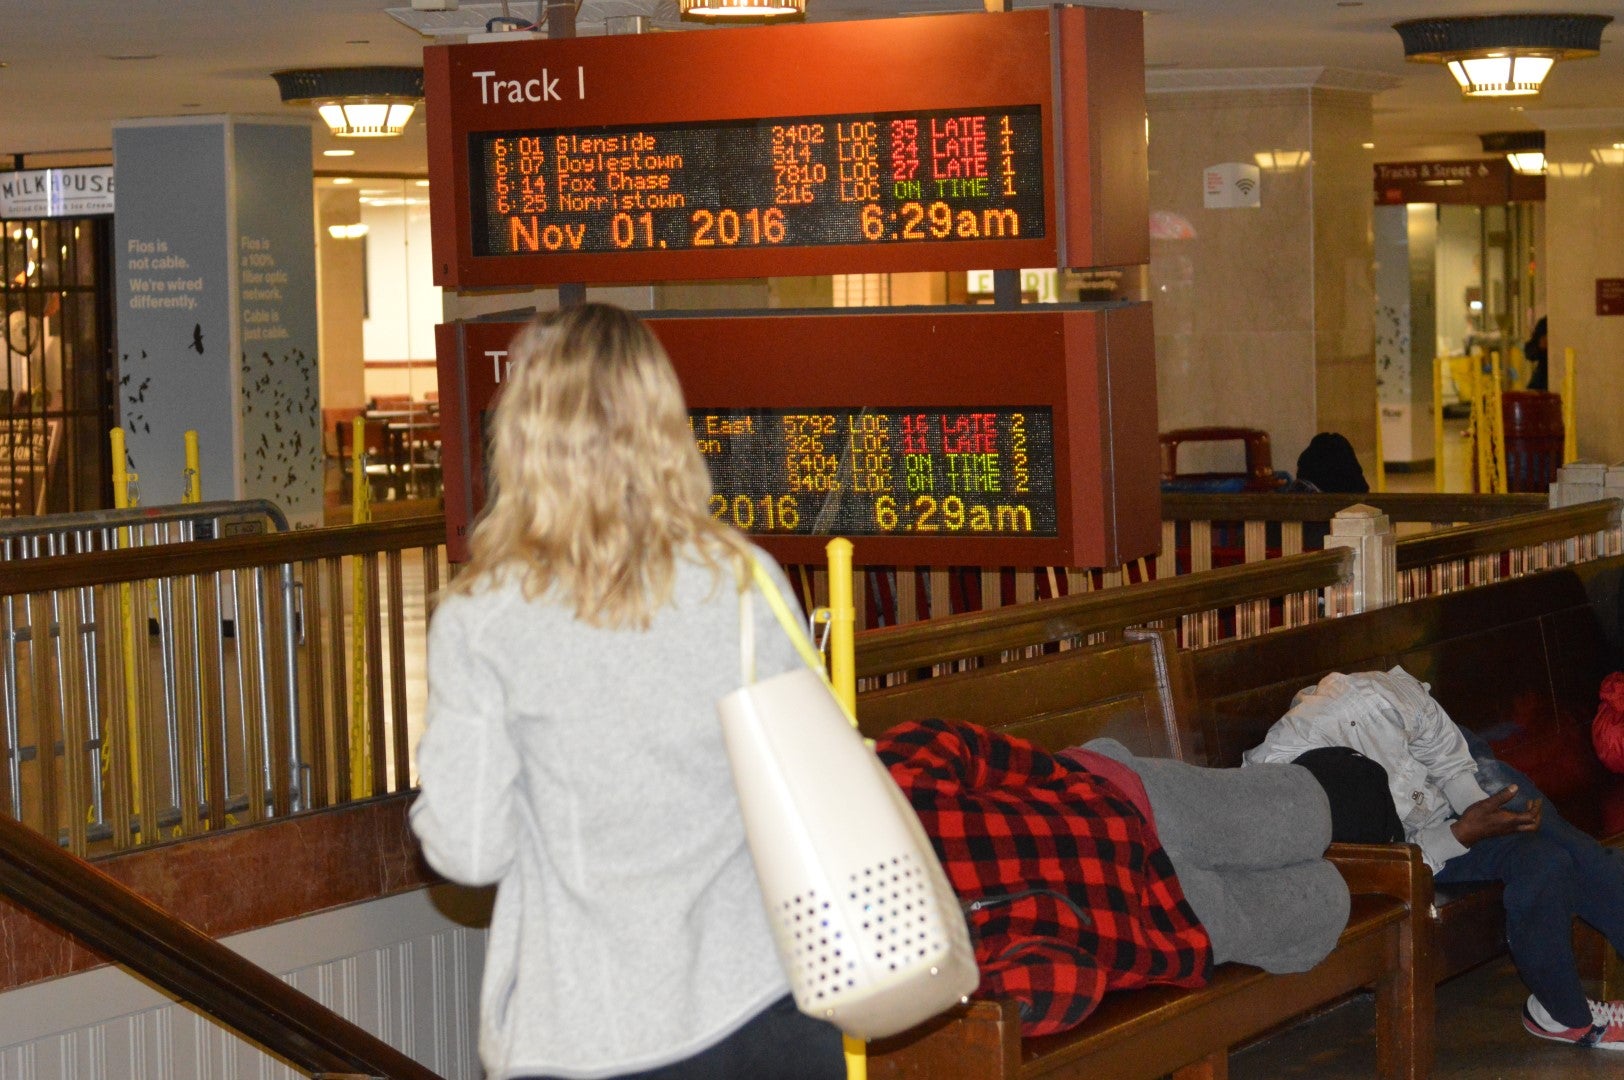 A commuter looks at notices of delays on screen at Suburban Station. (Tom MacDonald/WHYY)